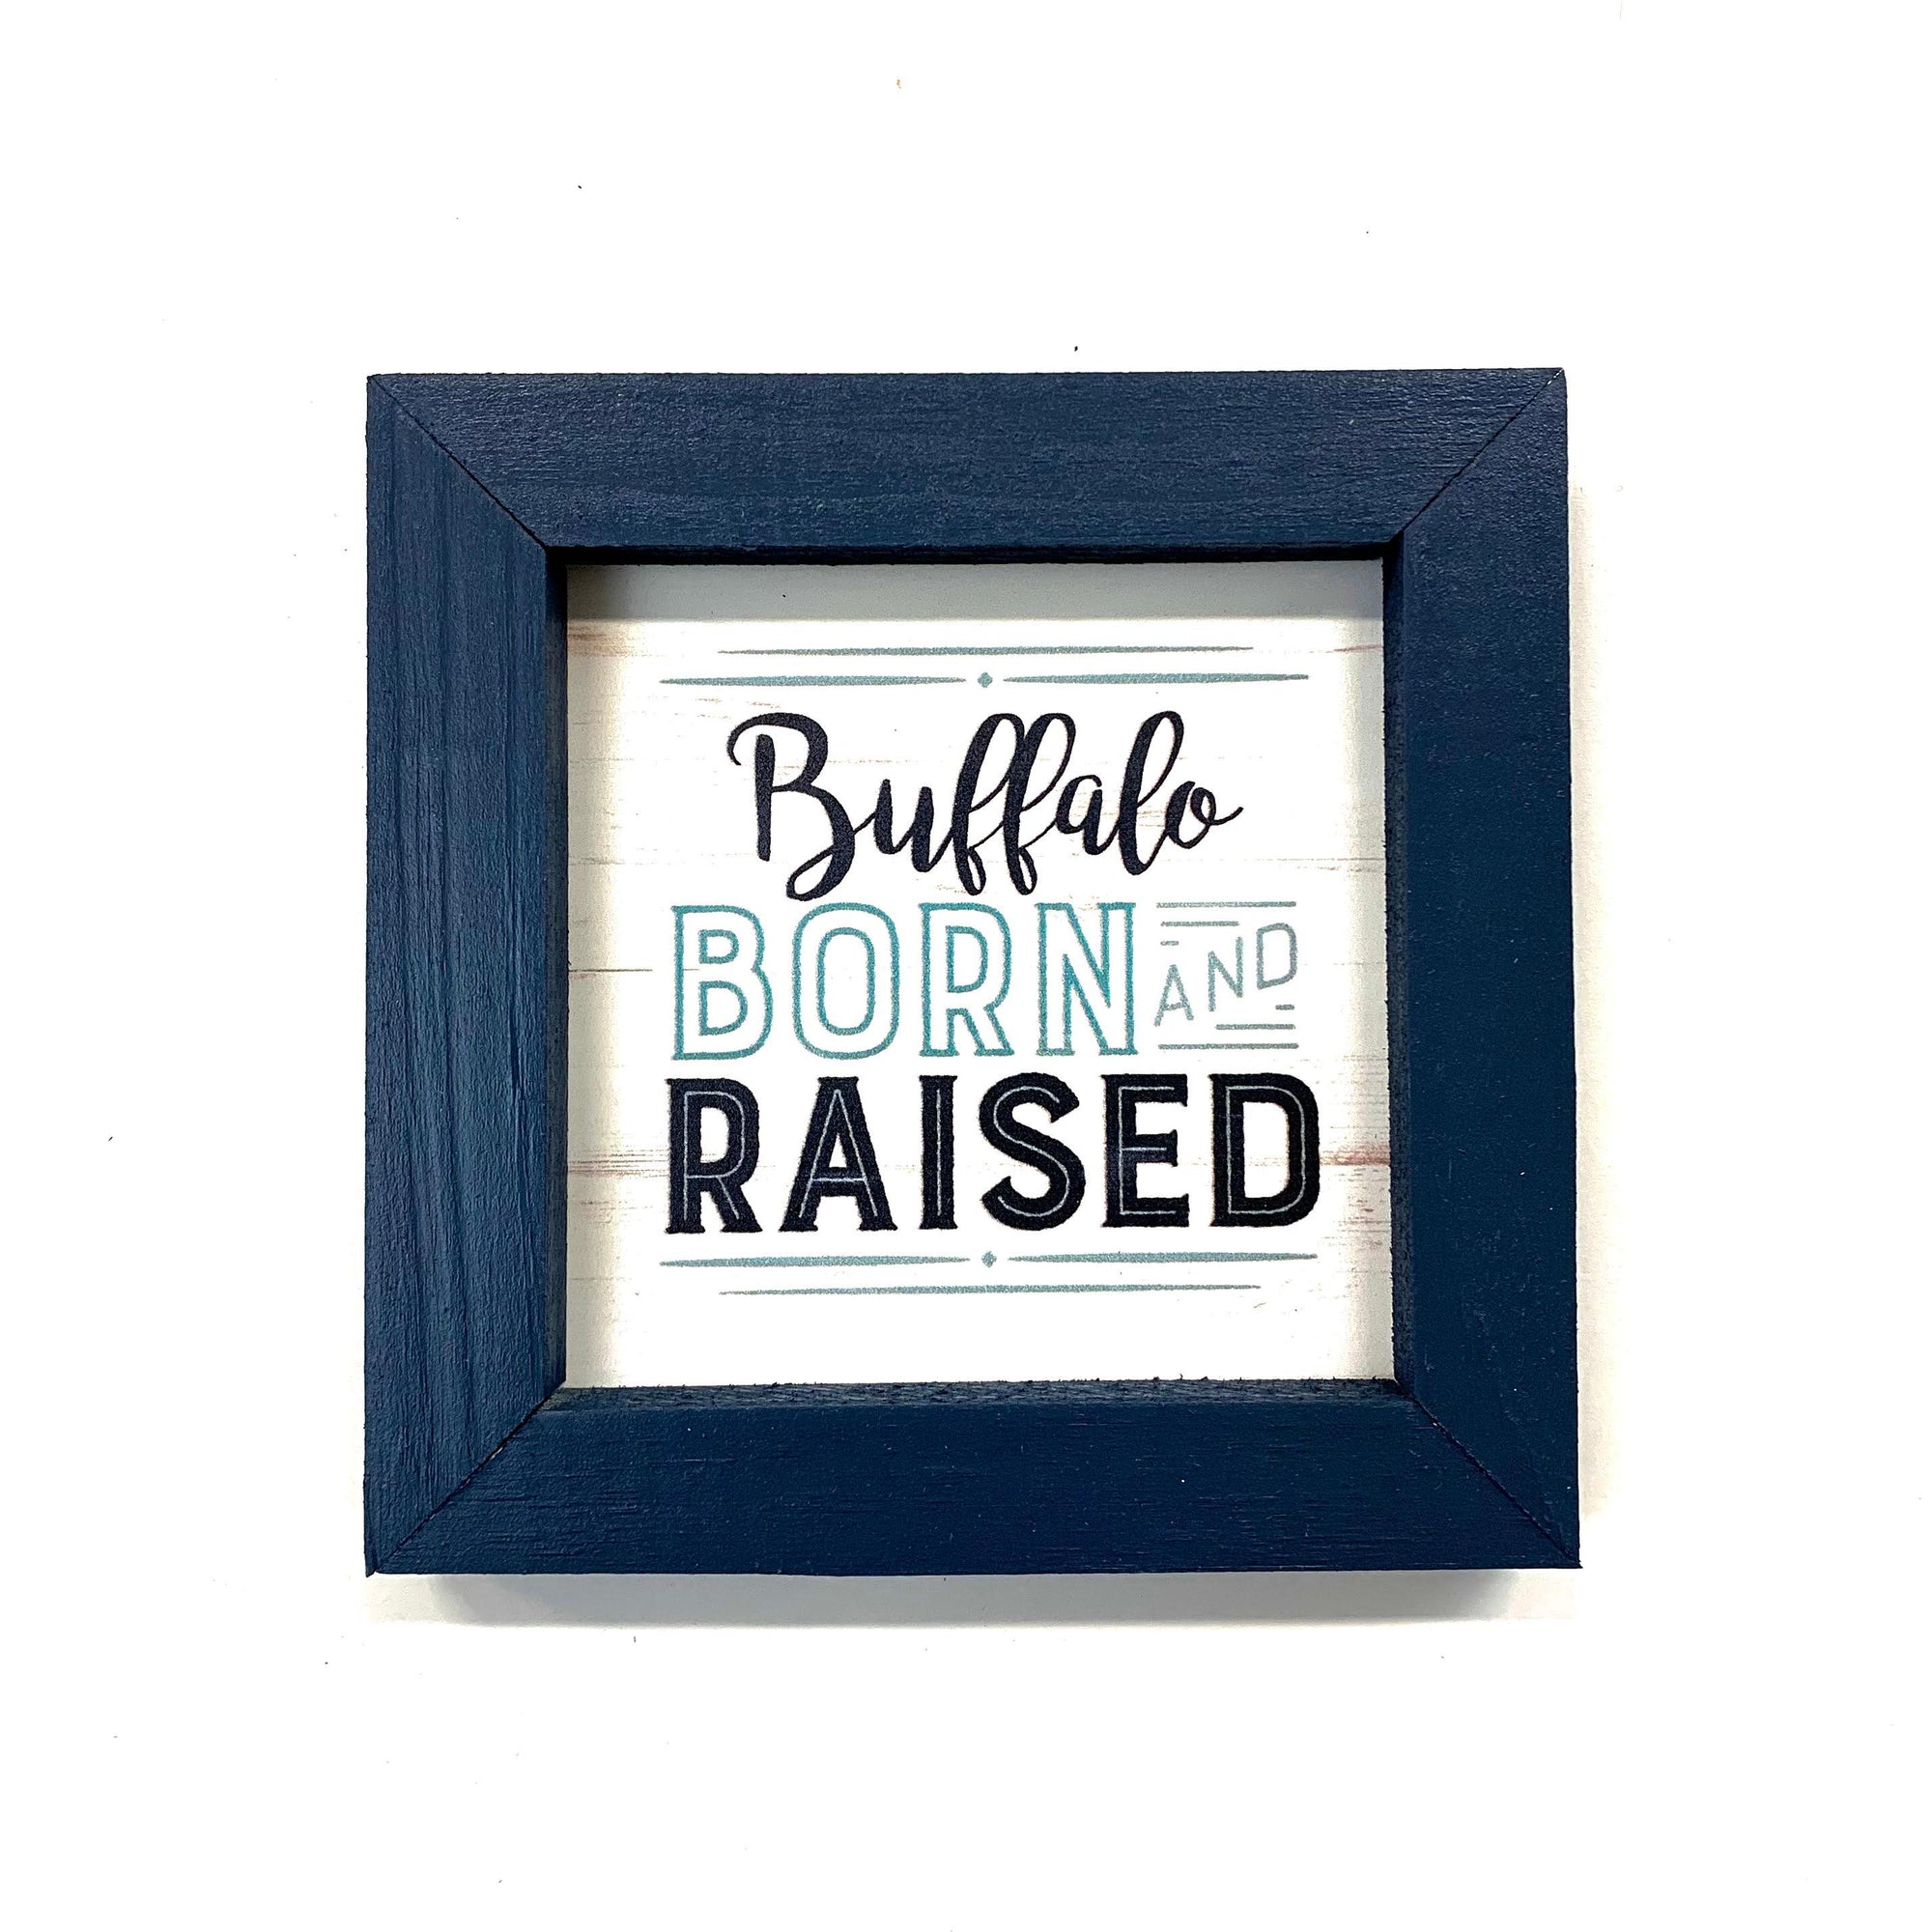 "Buffalo Born and Raised" Wooden Sign - The BFLO Store